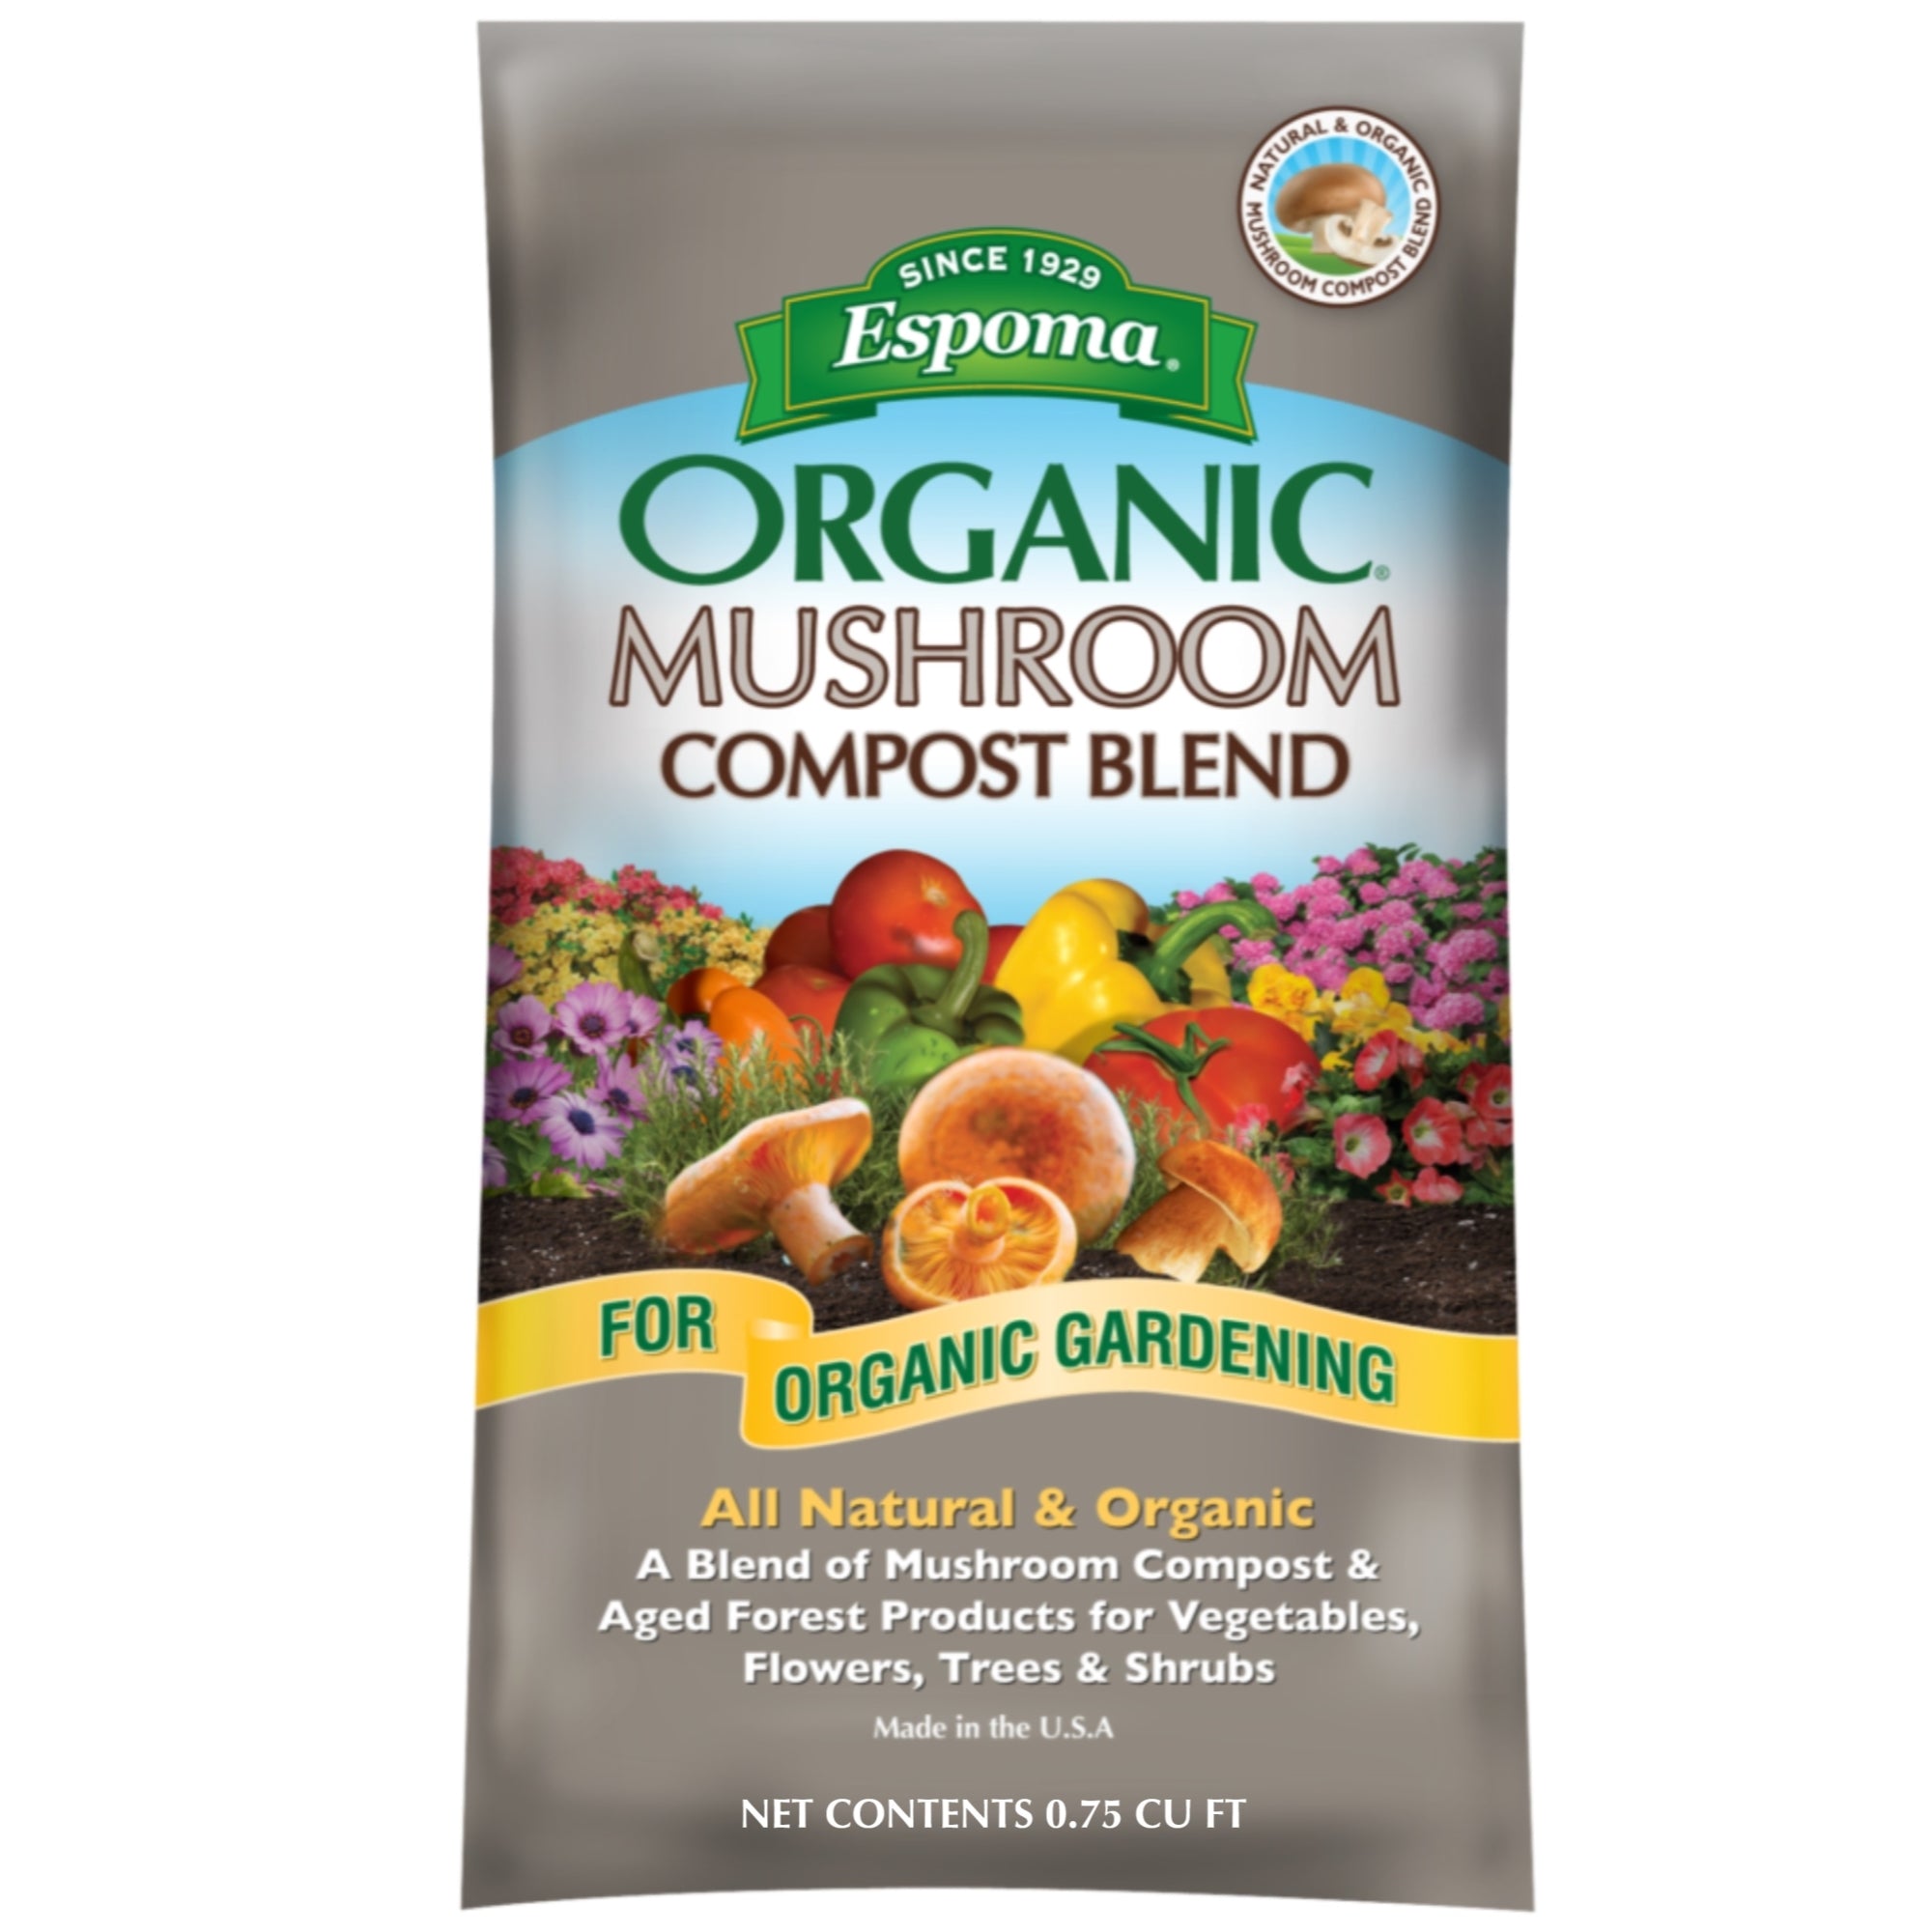 Espoma Organic All Natural & Organic Mushroom Compost Blend of Mushroom Compost & Aged Forest Products for Organic Gardening, 0.75 CF Bag